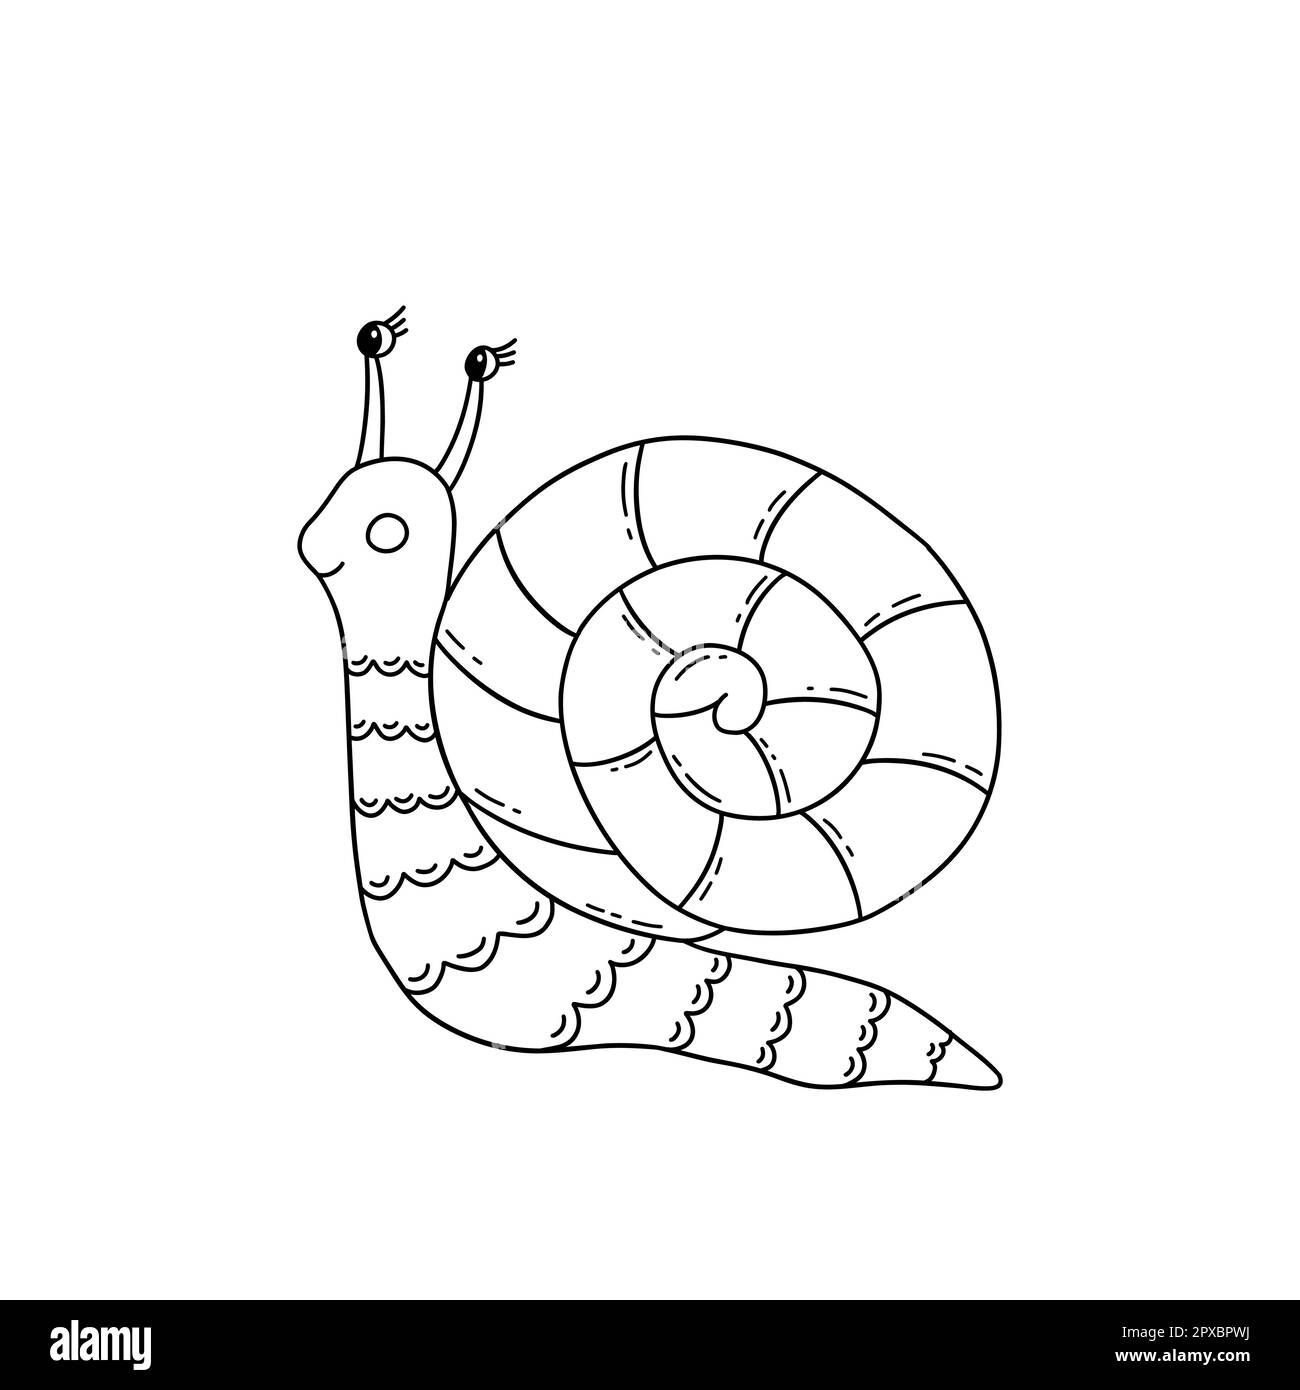 Cute snail, clam with striped shell. Black and white vector isolated illustration hand drawn with outline doodle. Single icon or card element coloring Stock Vector